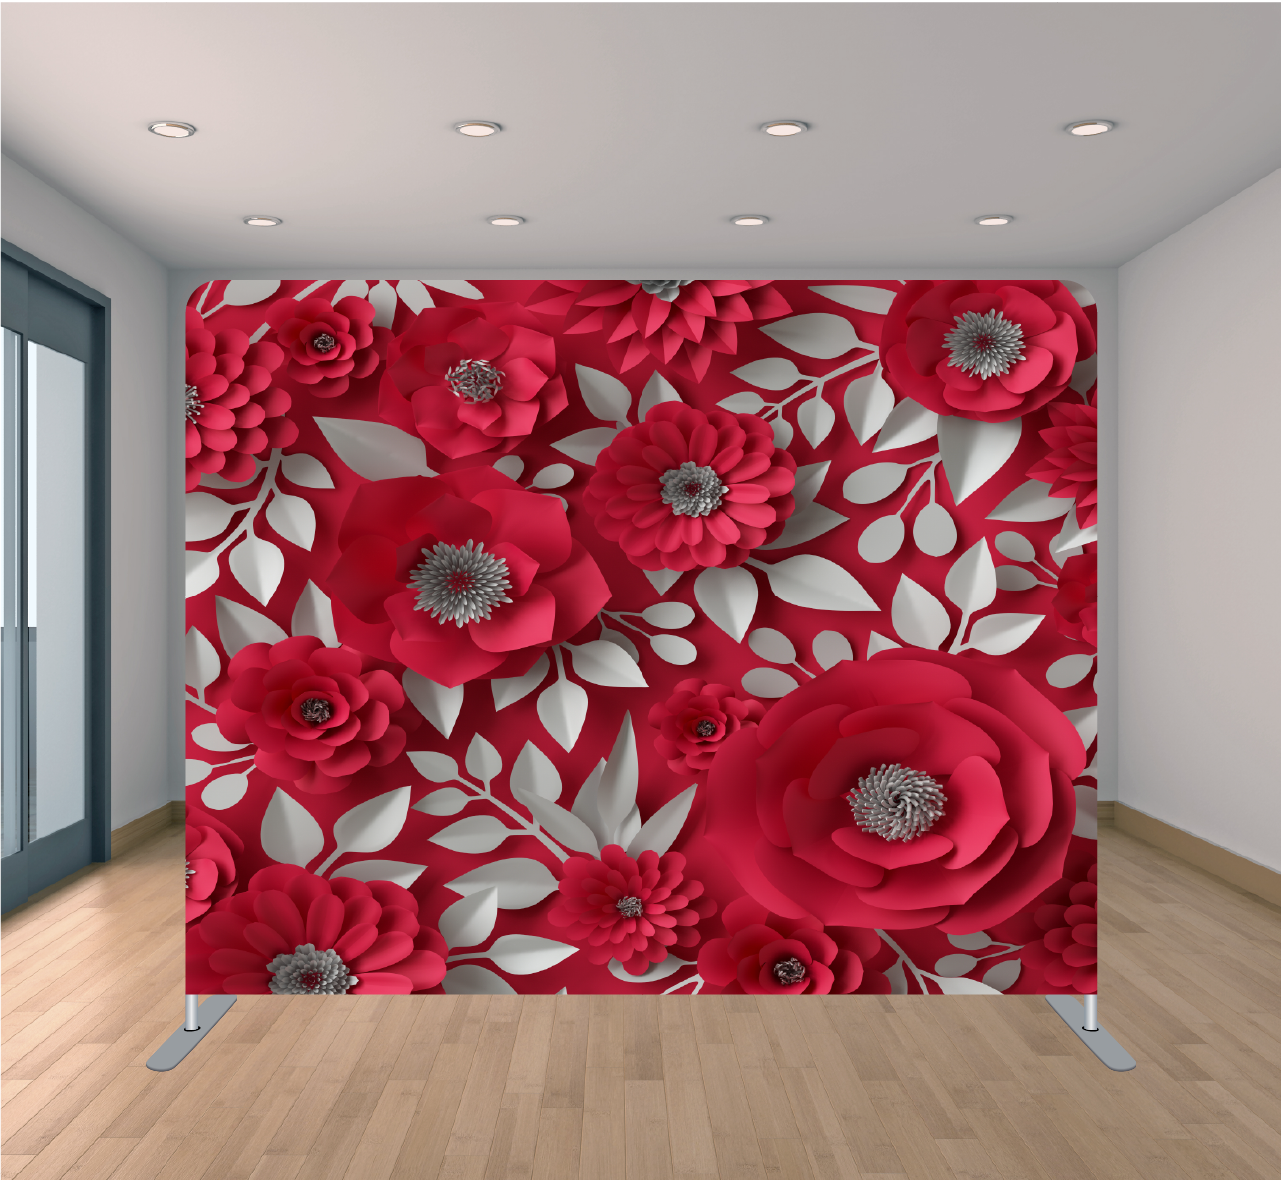 8x8ft Pillowcase Tension Backdrop- Red Paper Floral